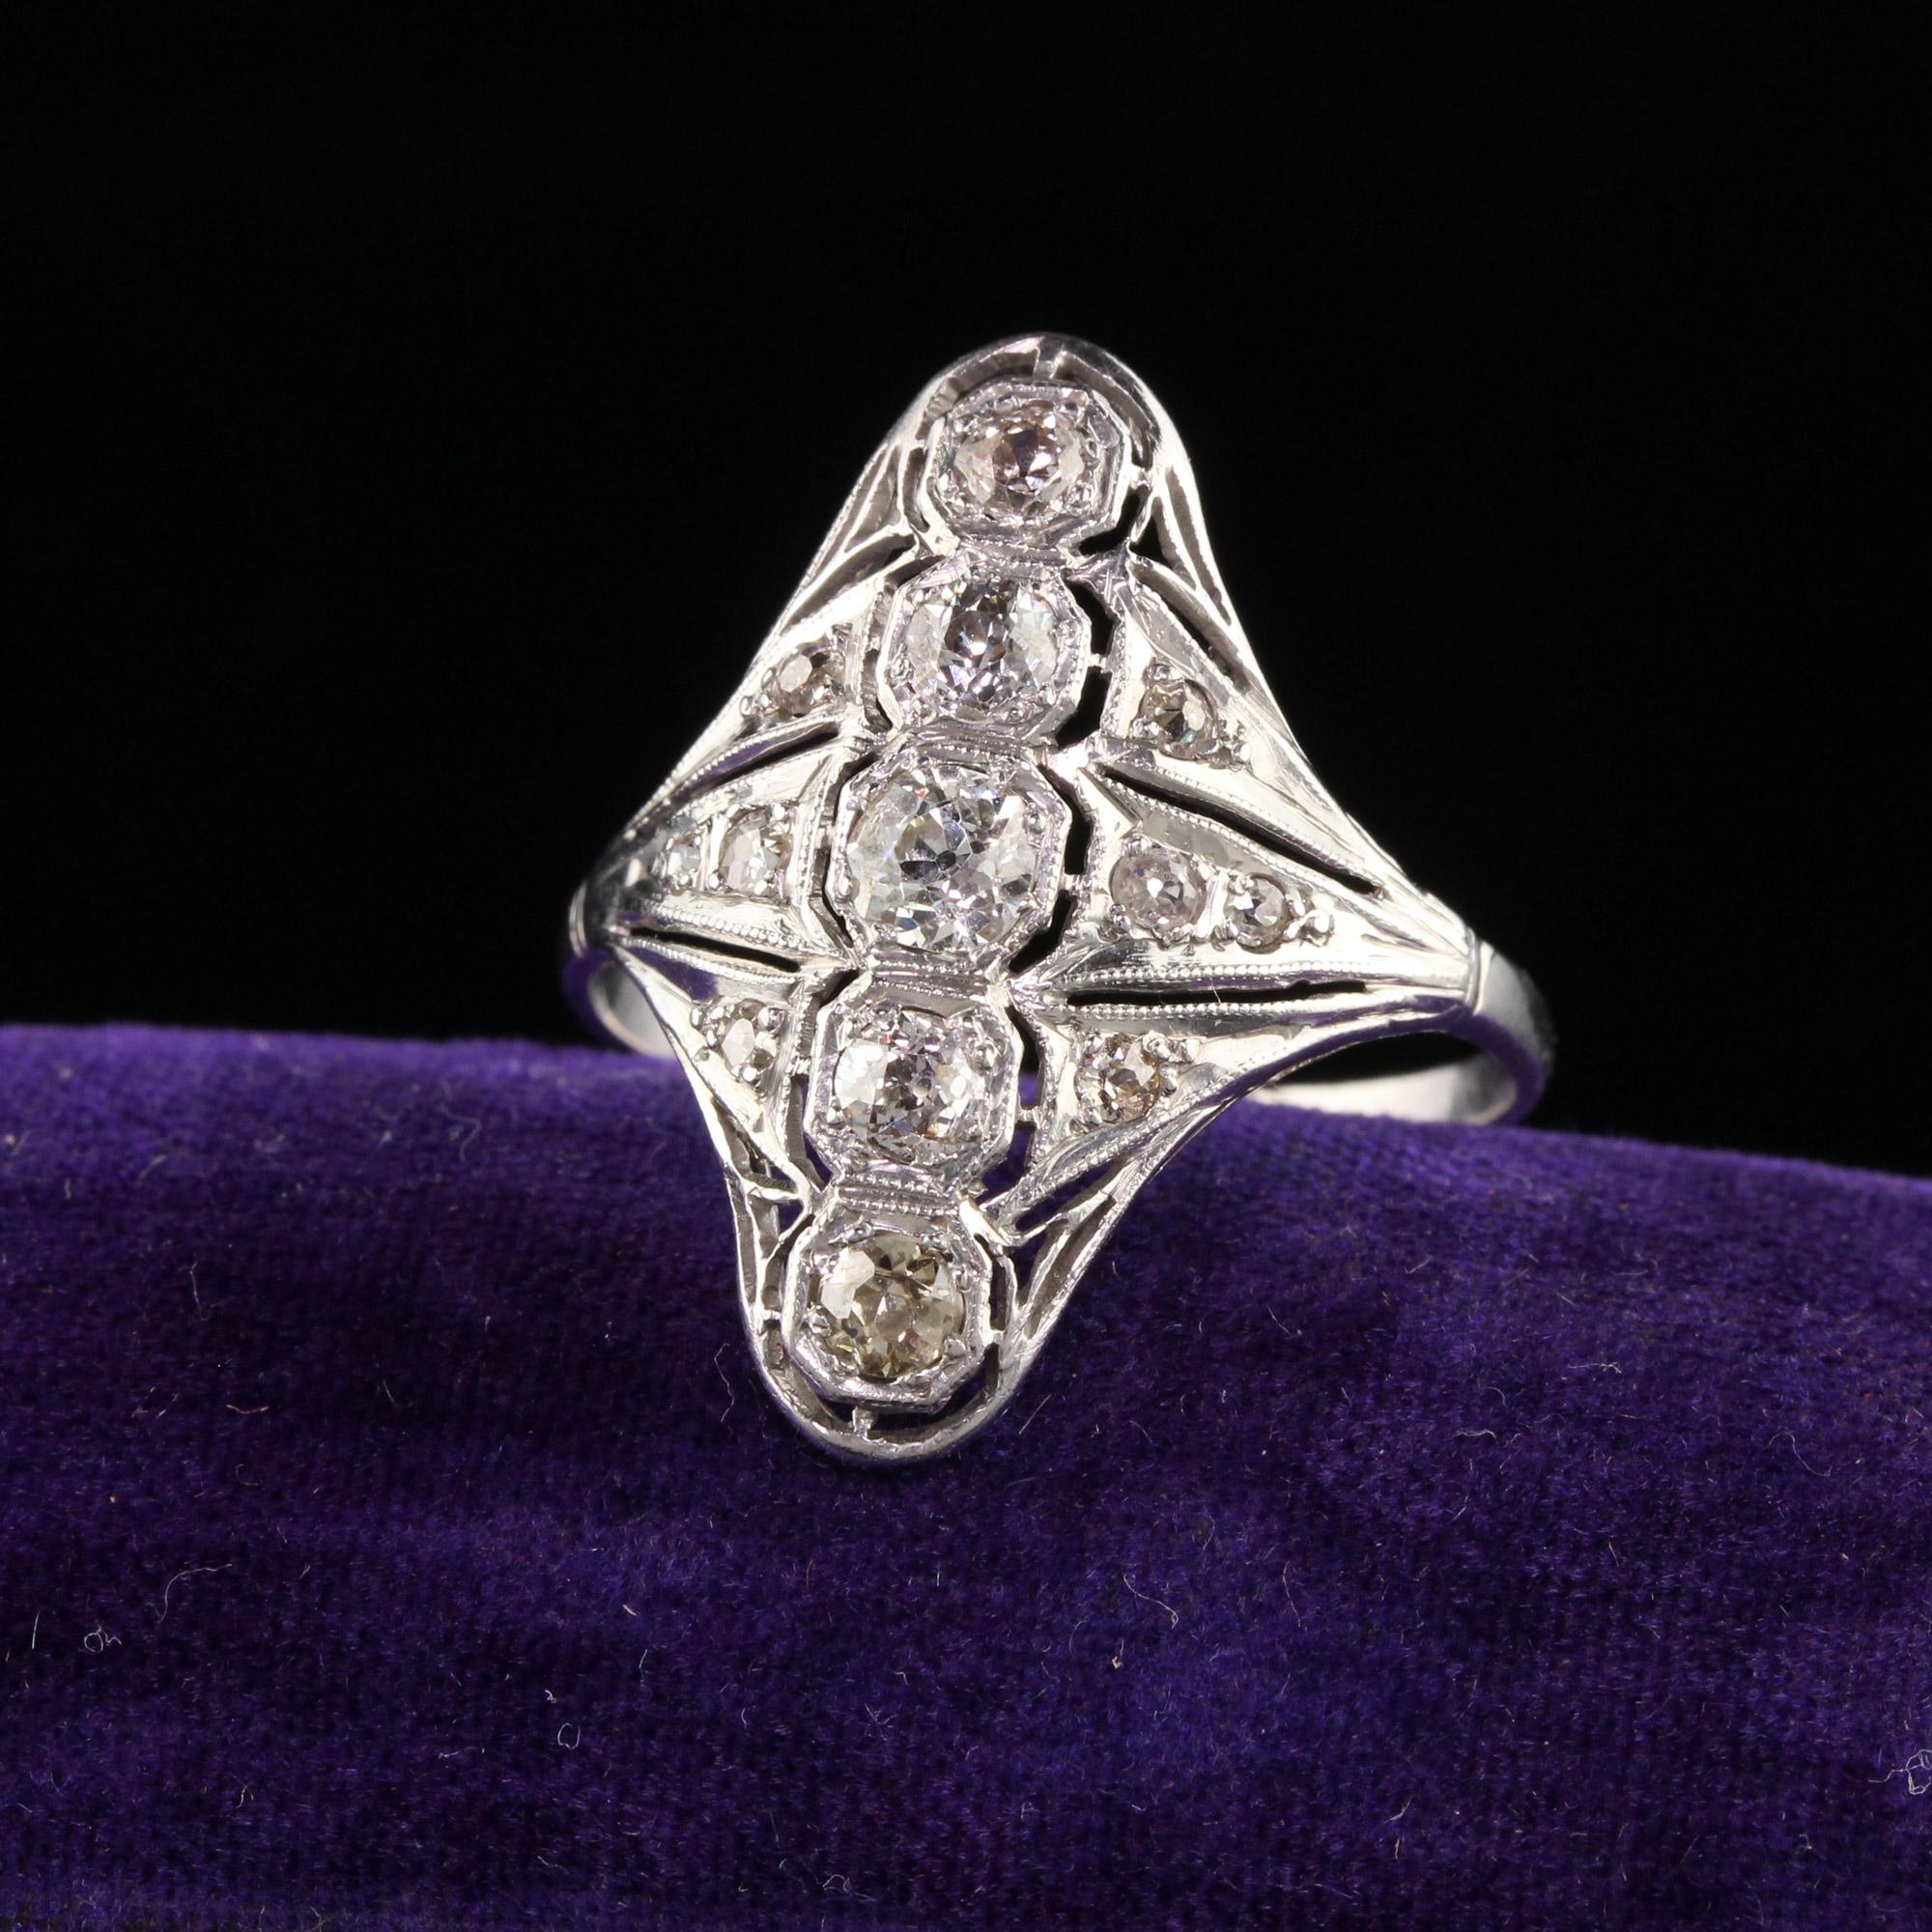 Beautiful Antique Art Deco Platinum Old European Cut Diamond Filigree Shield Ring. This beautiful shield ring is crafted in platinim. The ring has old mine and old european cut diamonds on a filigree mounting with milgraining.

Item #R1304

Metal: